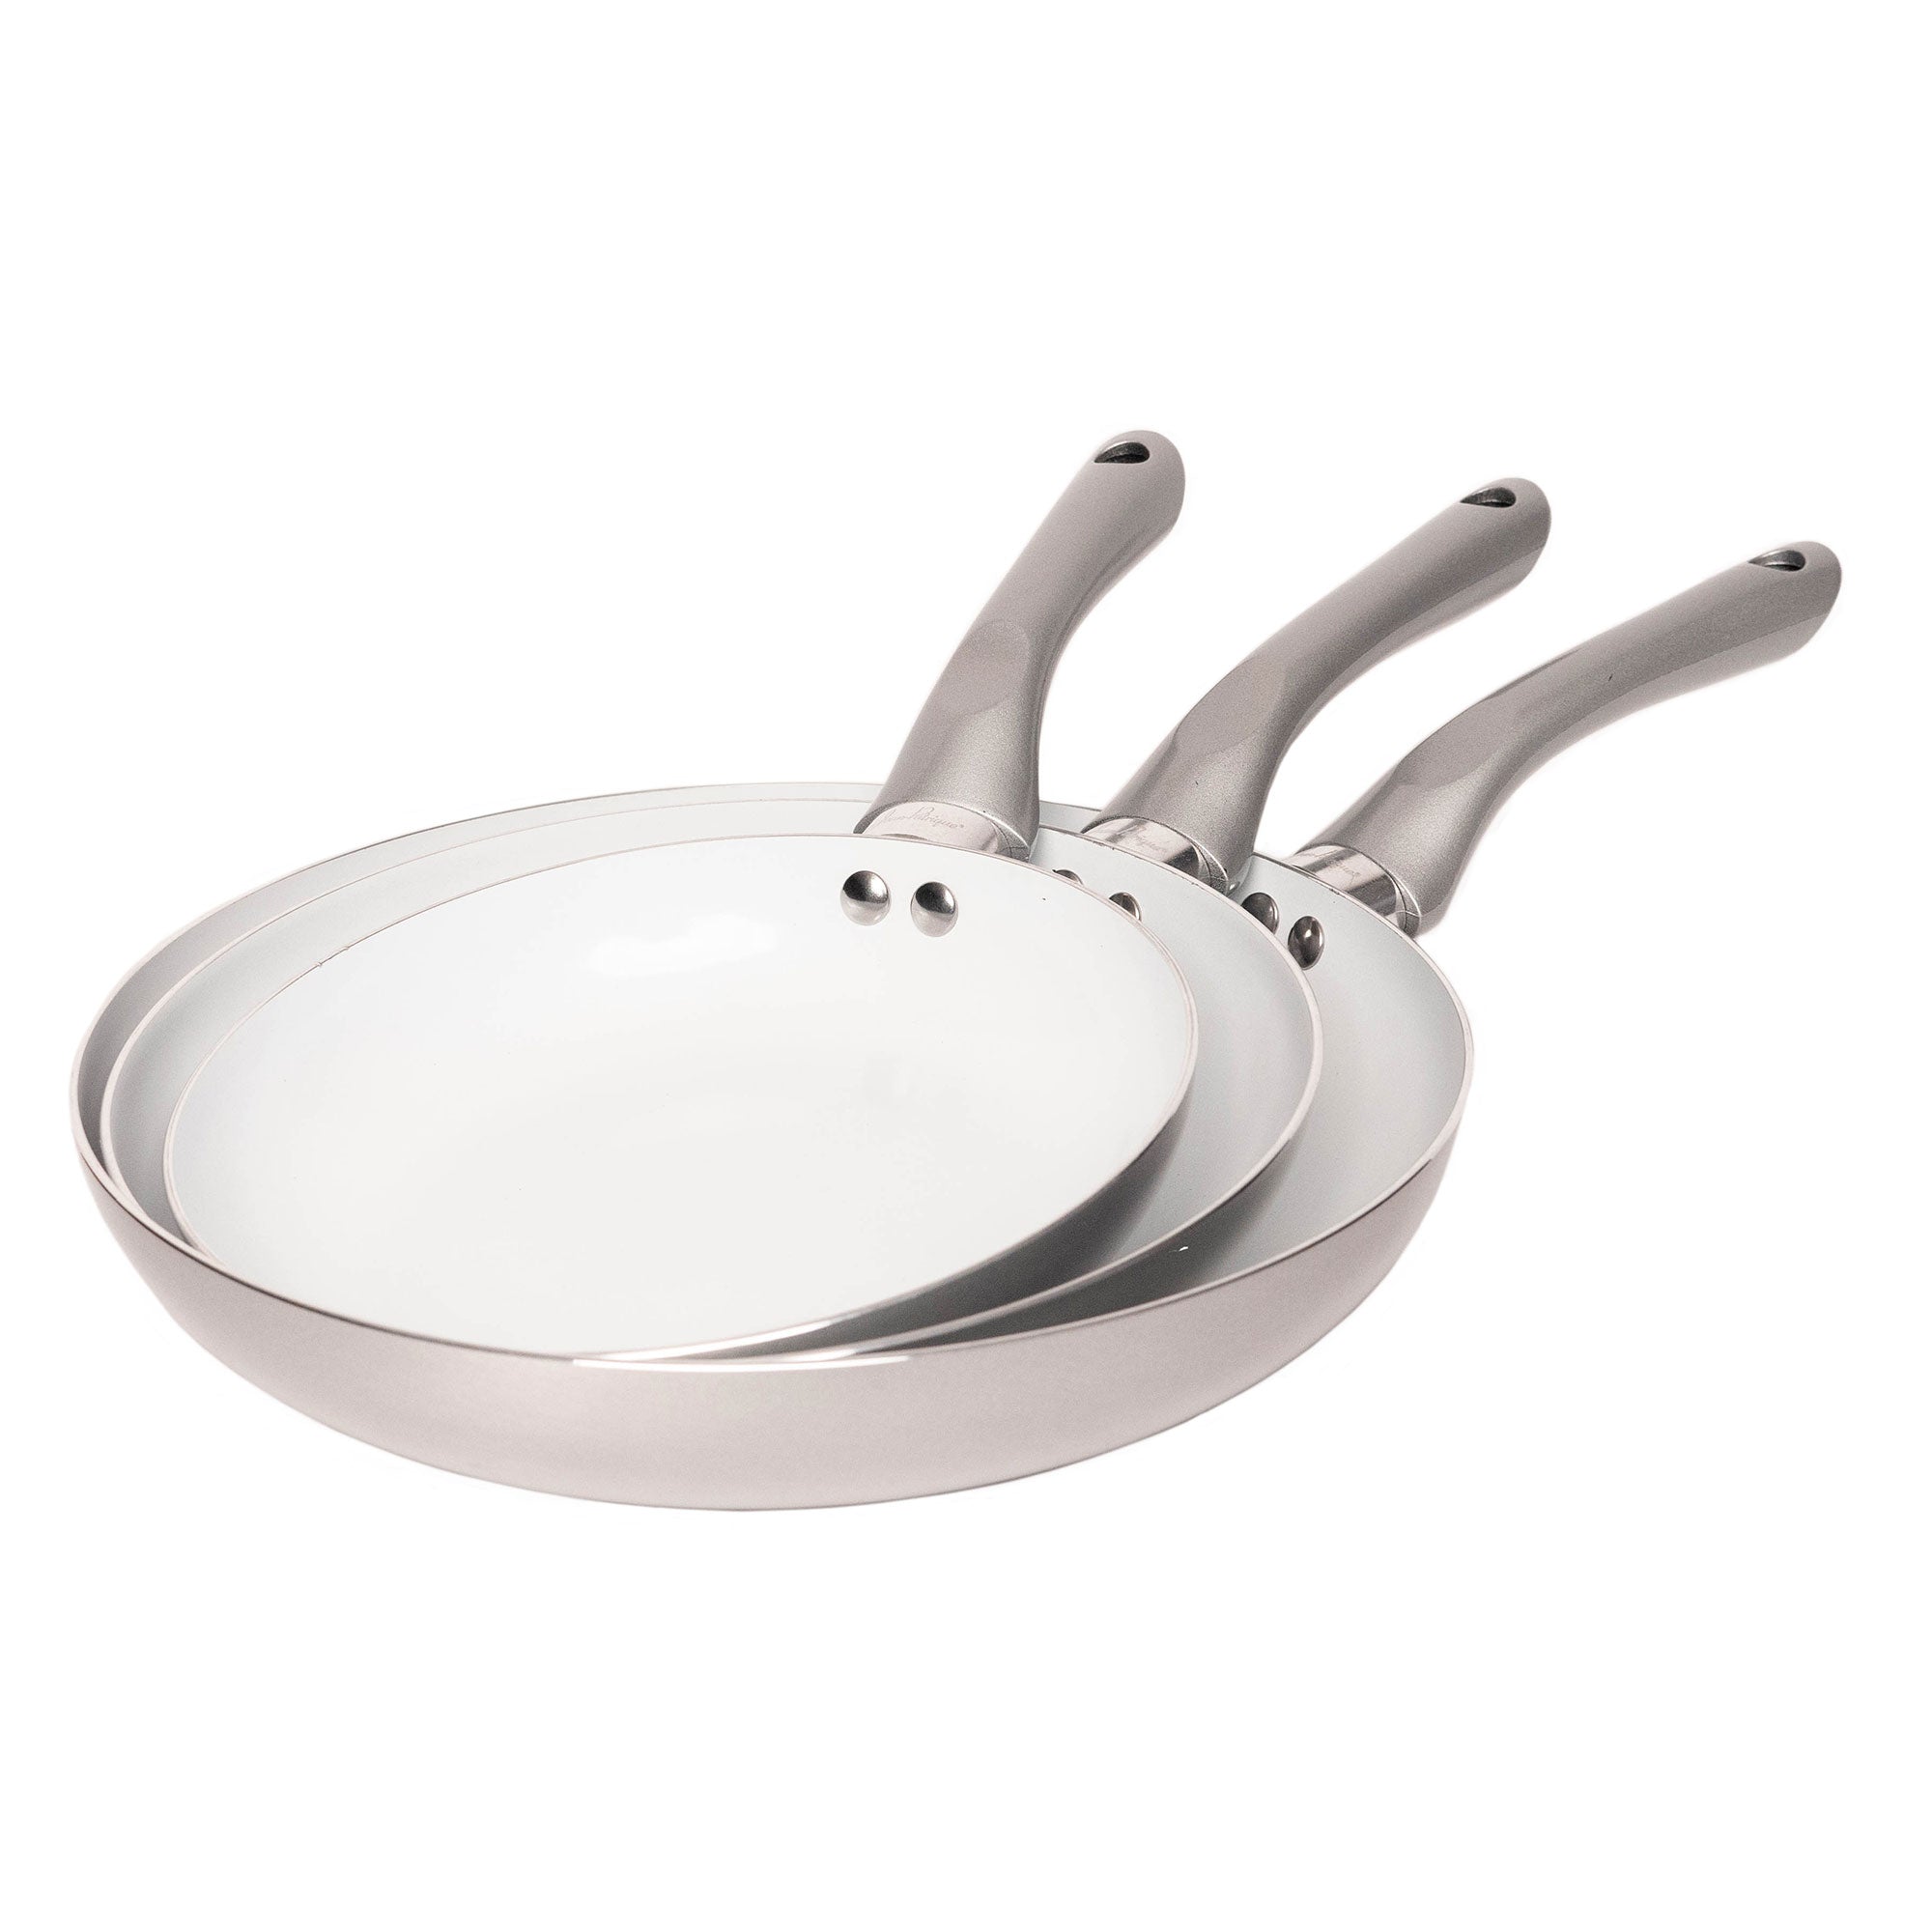 Hell's Kitchen 2 Piece Nonstick Skillet Set, Induction Ready Fry Pans